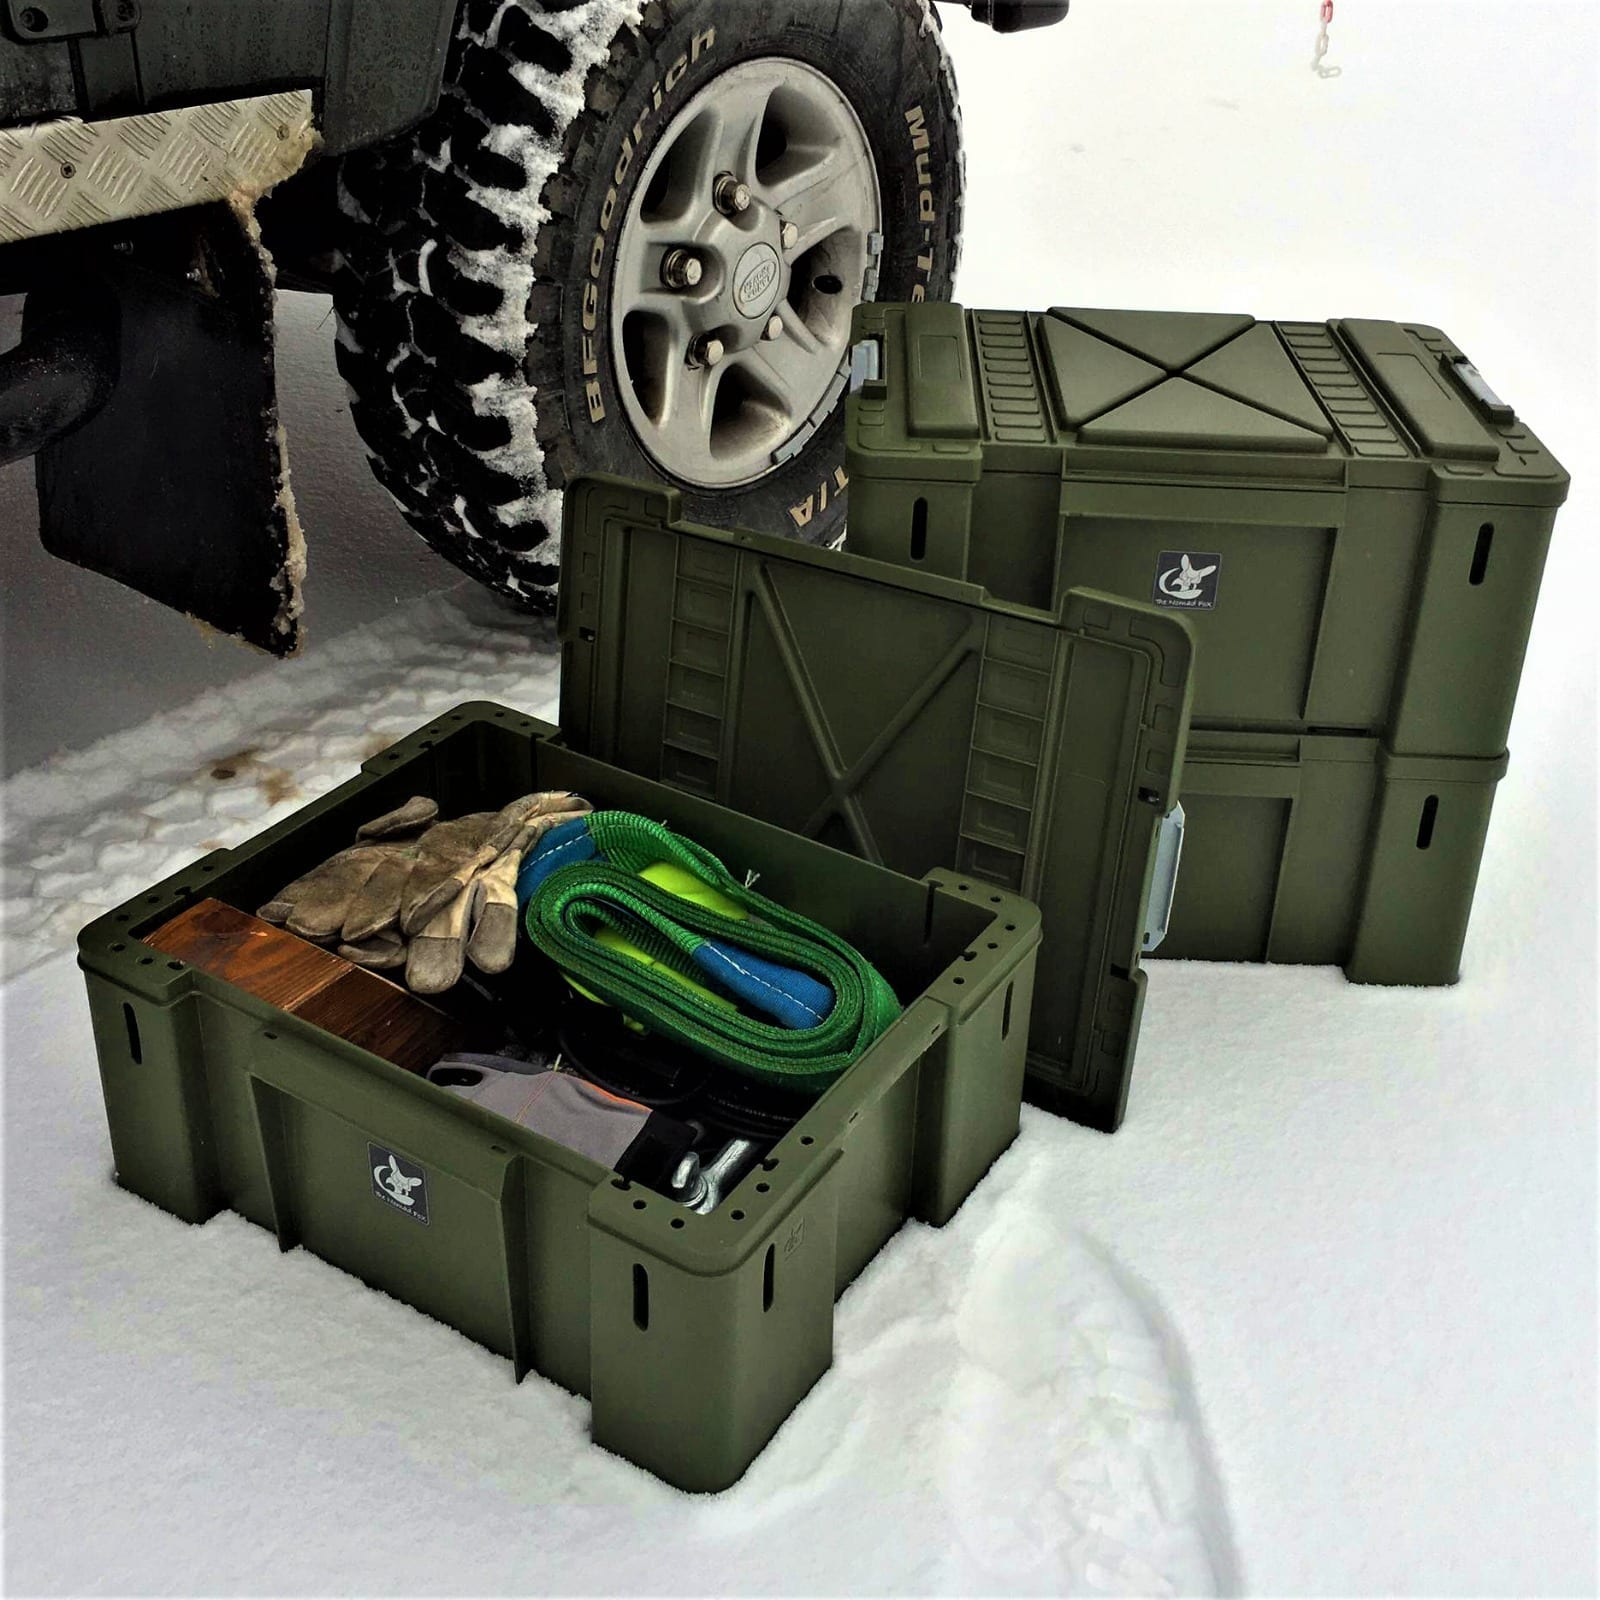 Vehicle storage boxes for 4x4 and off road routes The Nomad Box